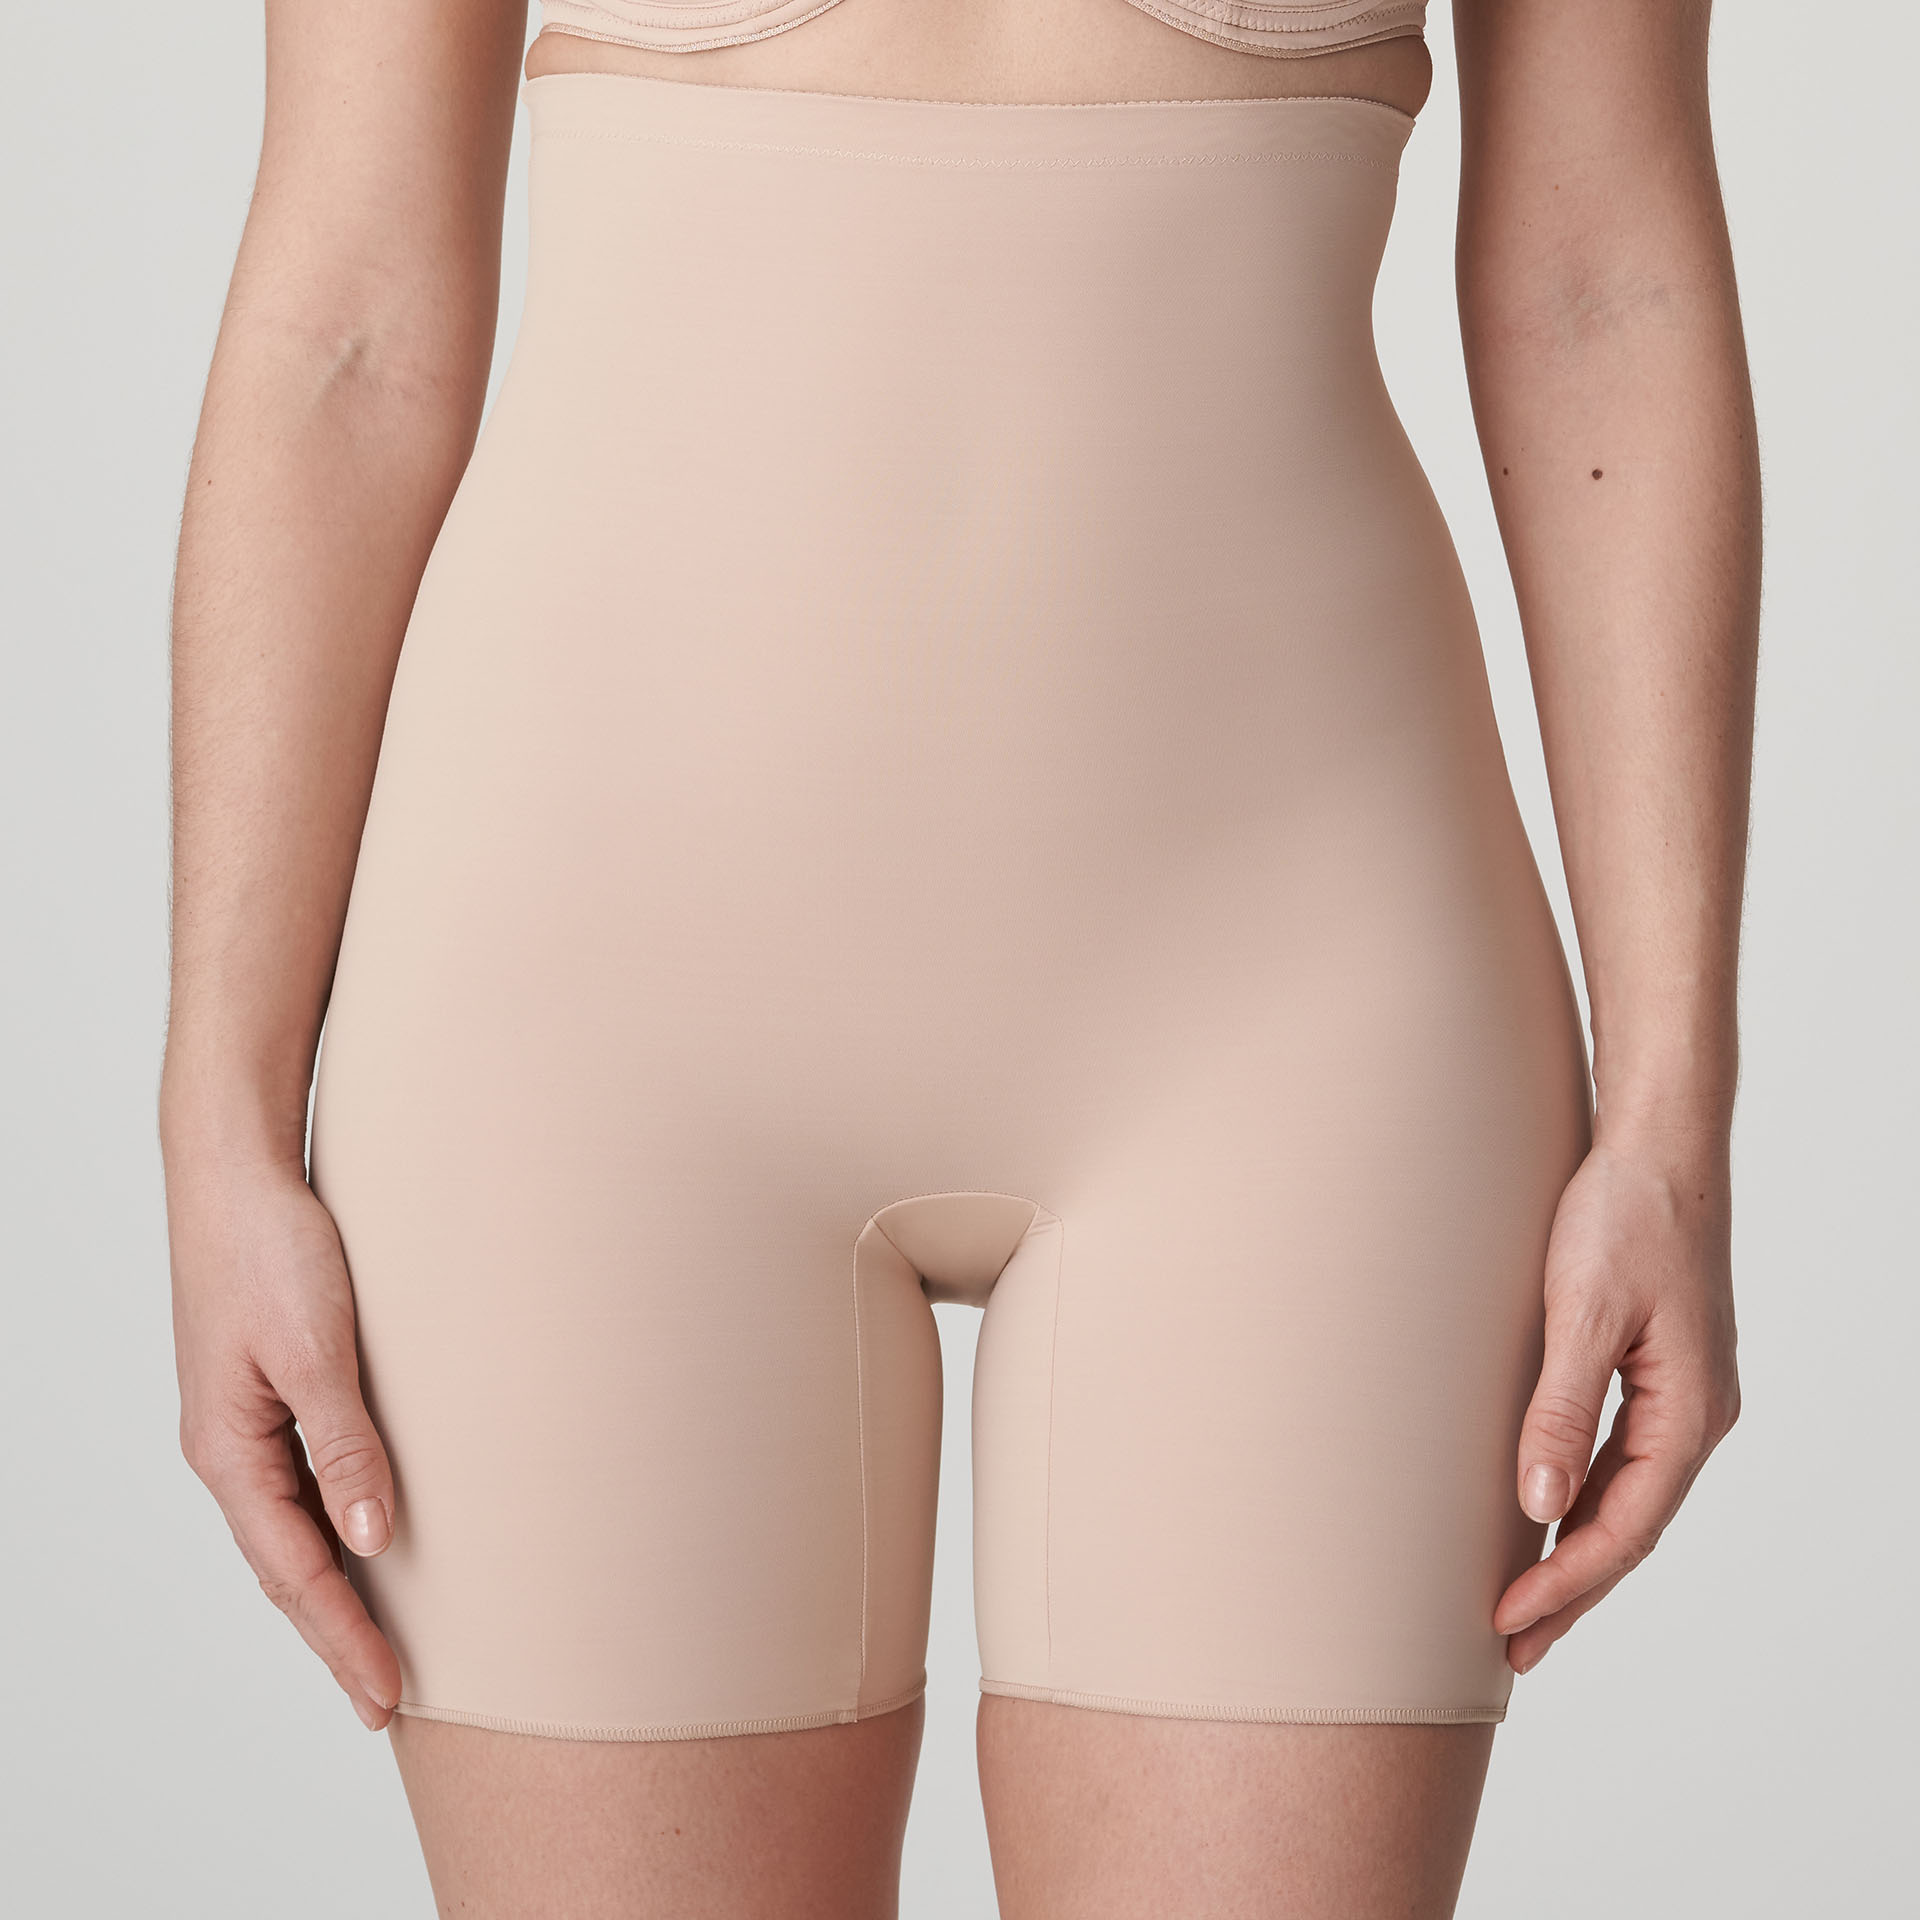 PrimaDonna Shapewear High Briefs with Legs 'Figuras' – Just For